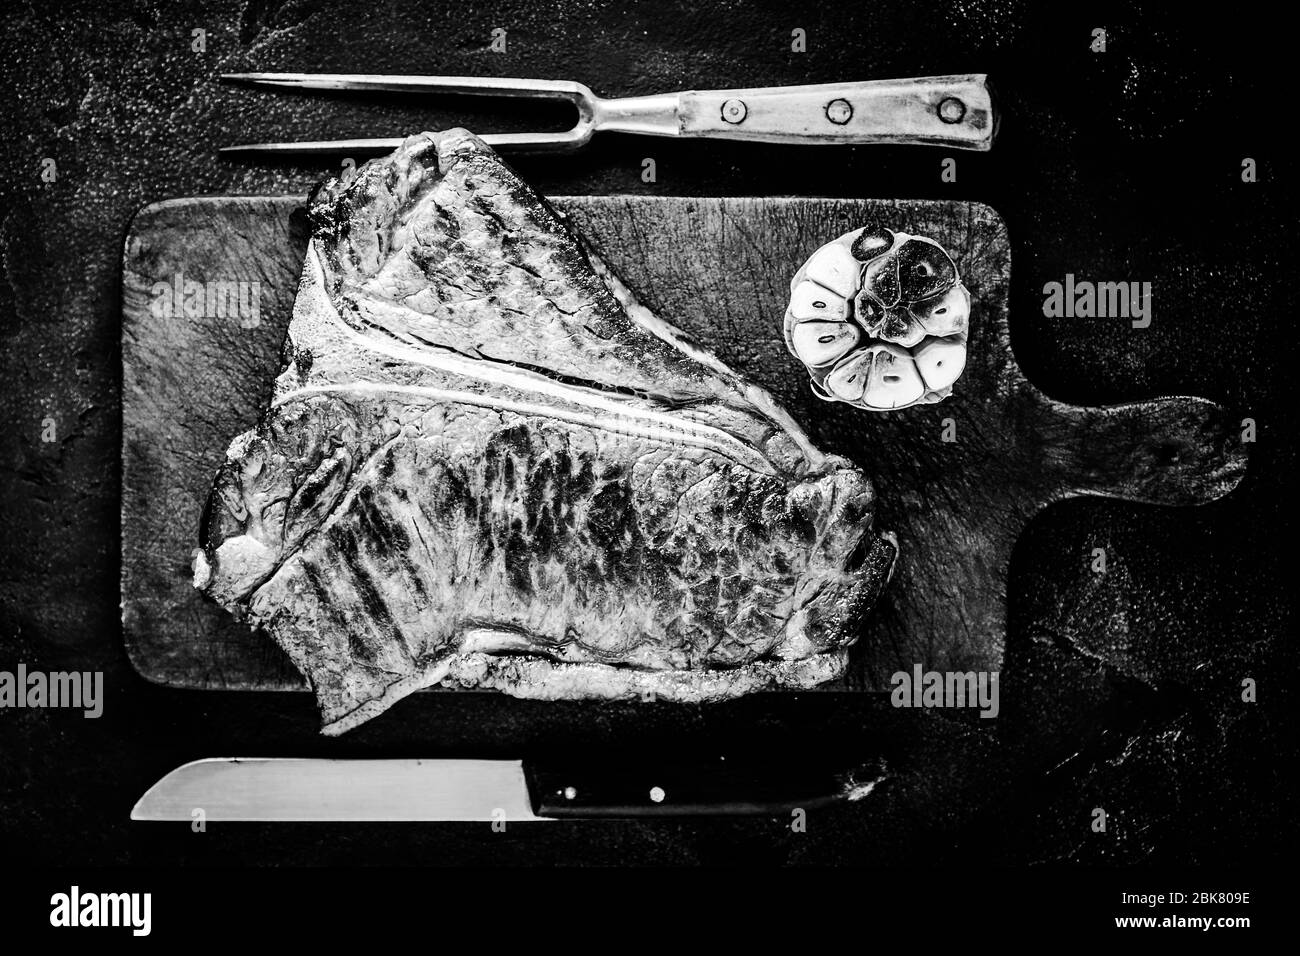 Grilled Dry Aged Premium T-bone Steak on Dark Rustic Chopping Board. Black and White USDA Prime Beef. Stock Photo